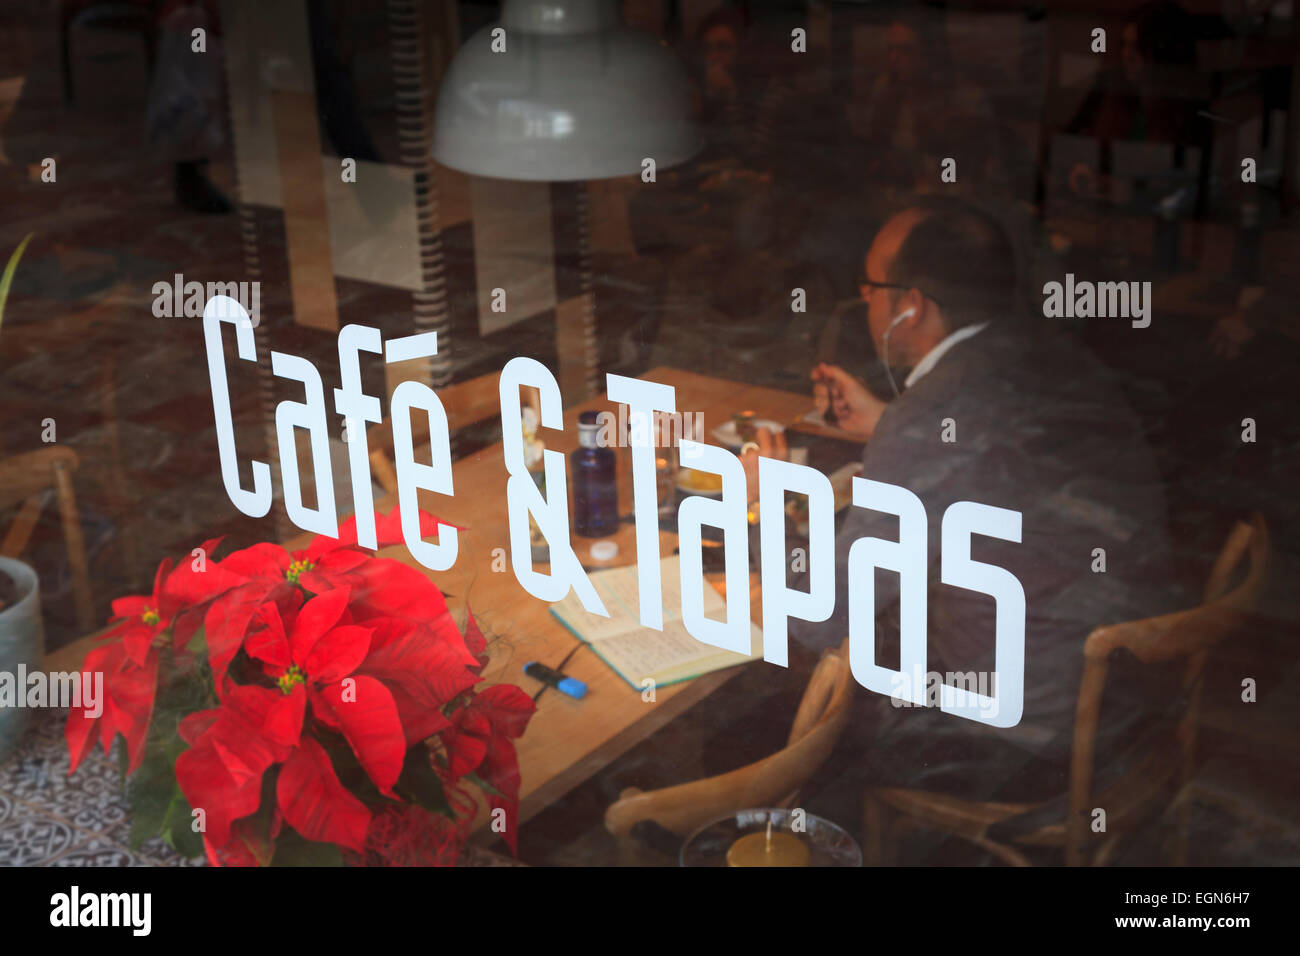 Cafe and Tapas sign on window with diner eating inside Stock Photo